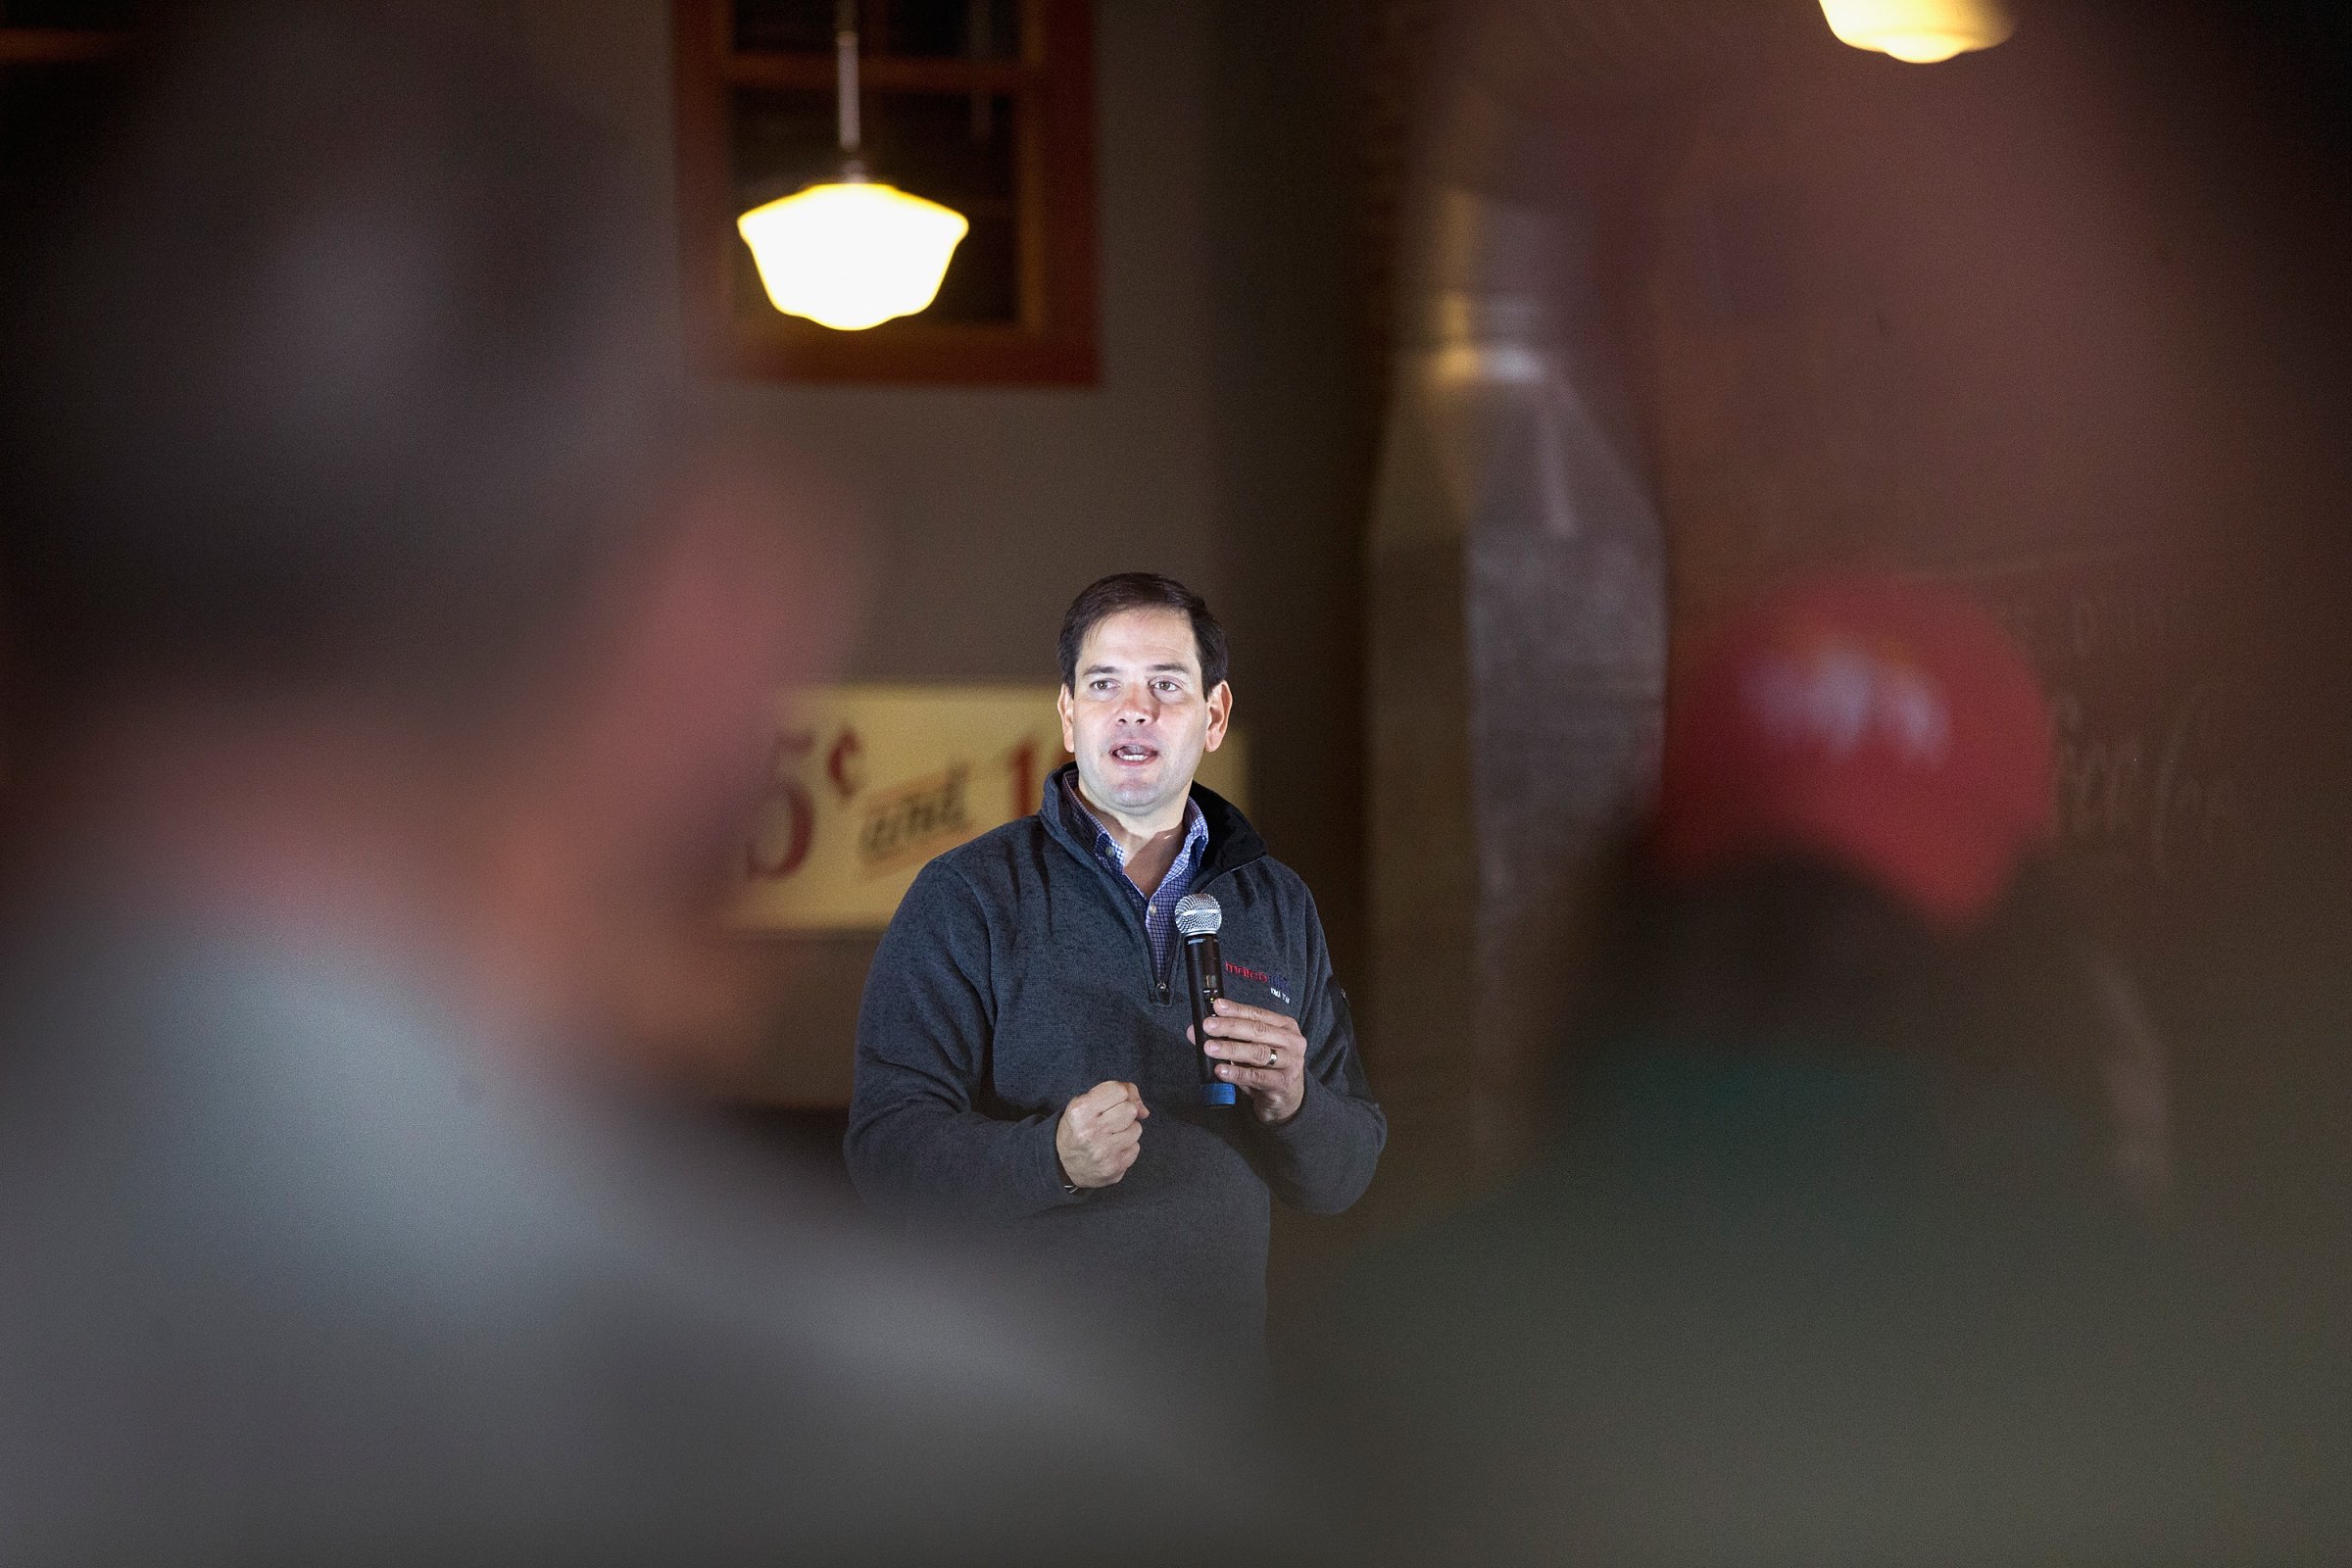 Republican presidential candidate Sen. Marco Rubio speaks to guests during a campaign stop at Smokey Row Coffee House in Oskaloosa, Iowa on Nov. 21, 2015.